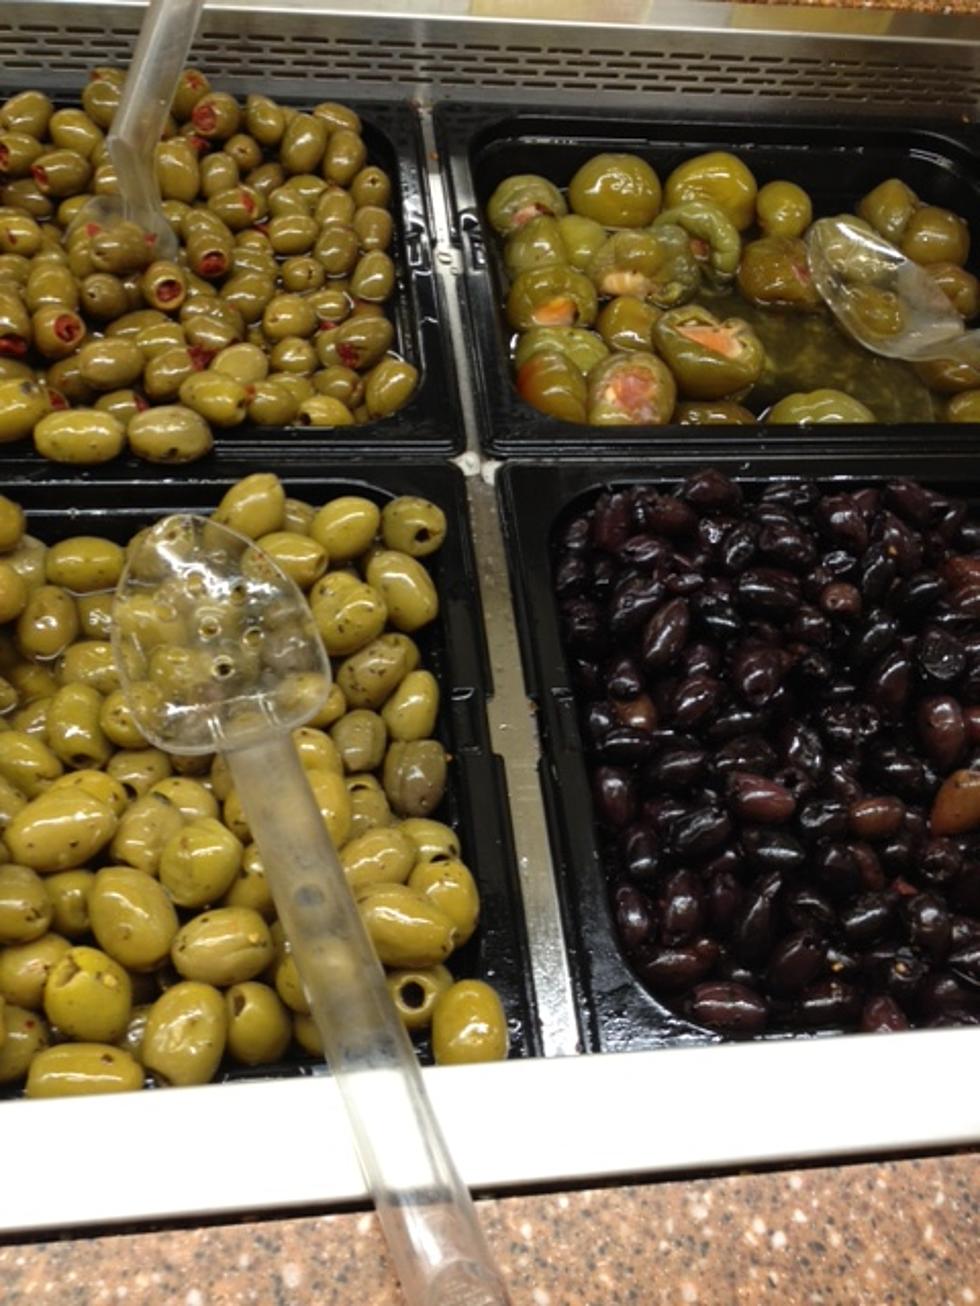 Confessions Of An Olive Bar Sampler [POLL]